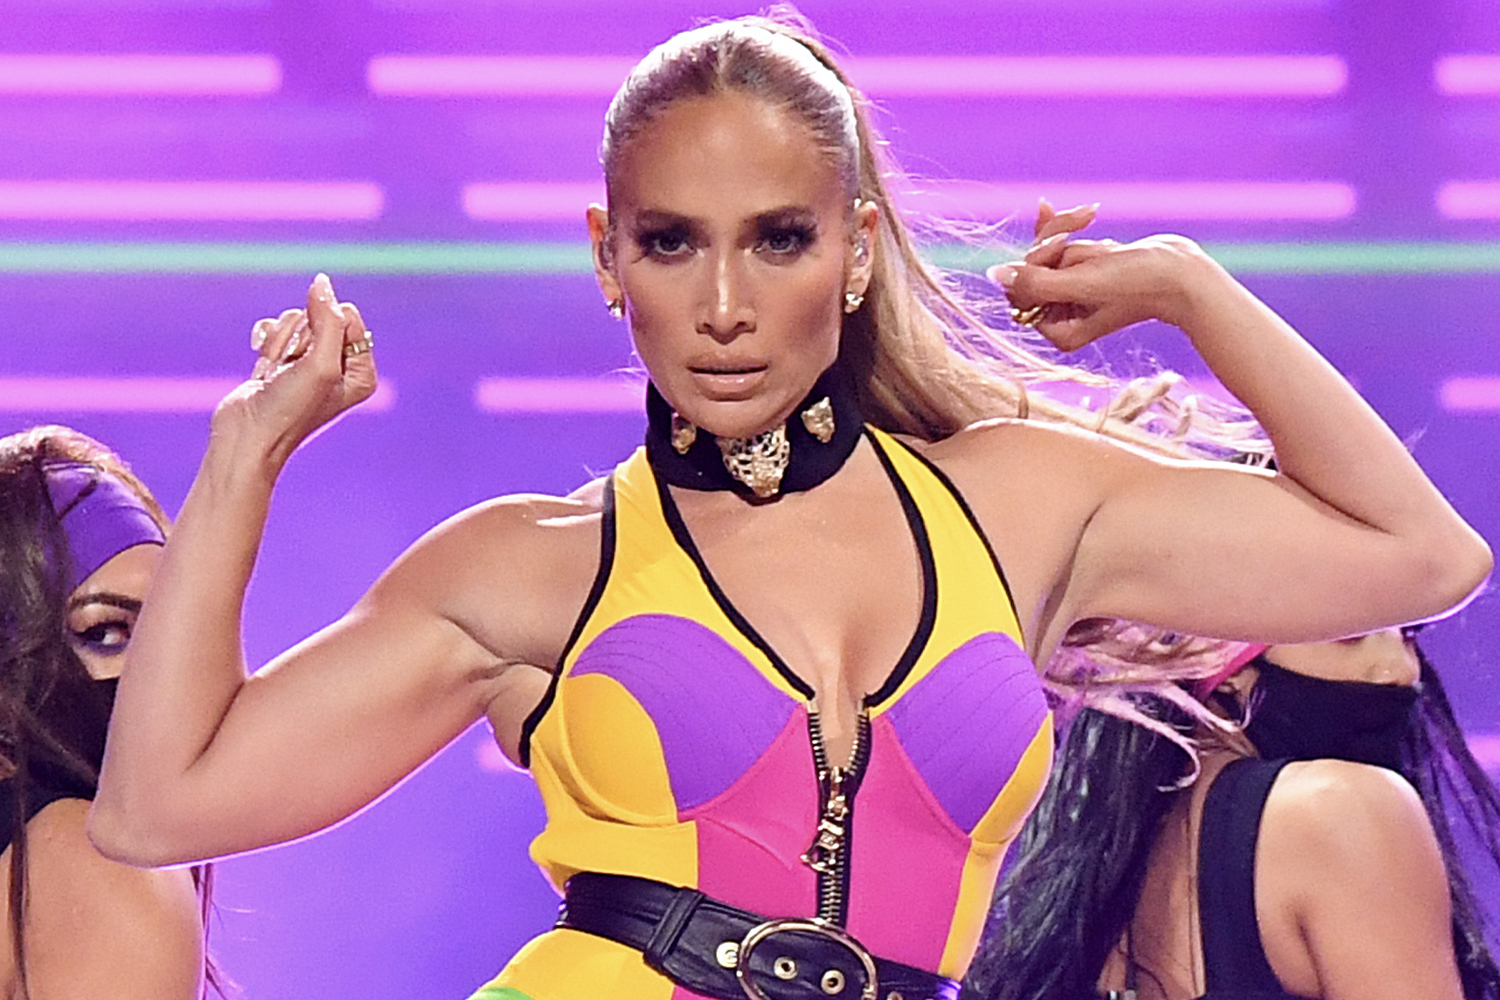 Jennifer Lopez dancing during a performance for Global Citizen VAX LIVE